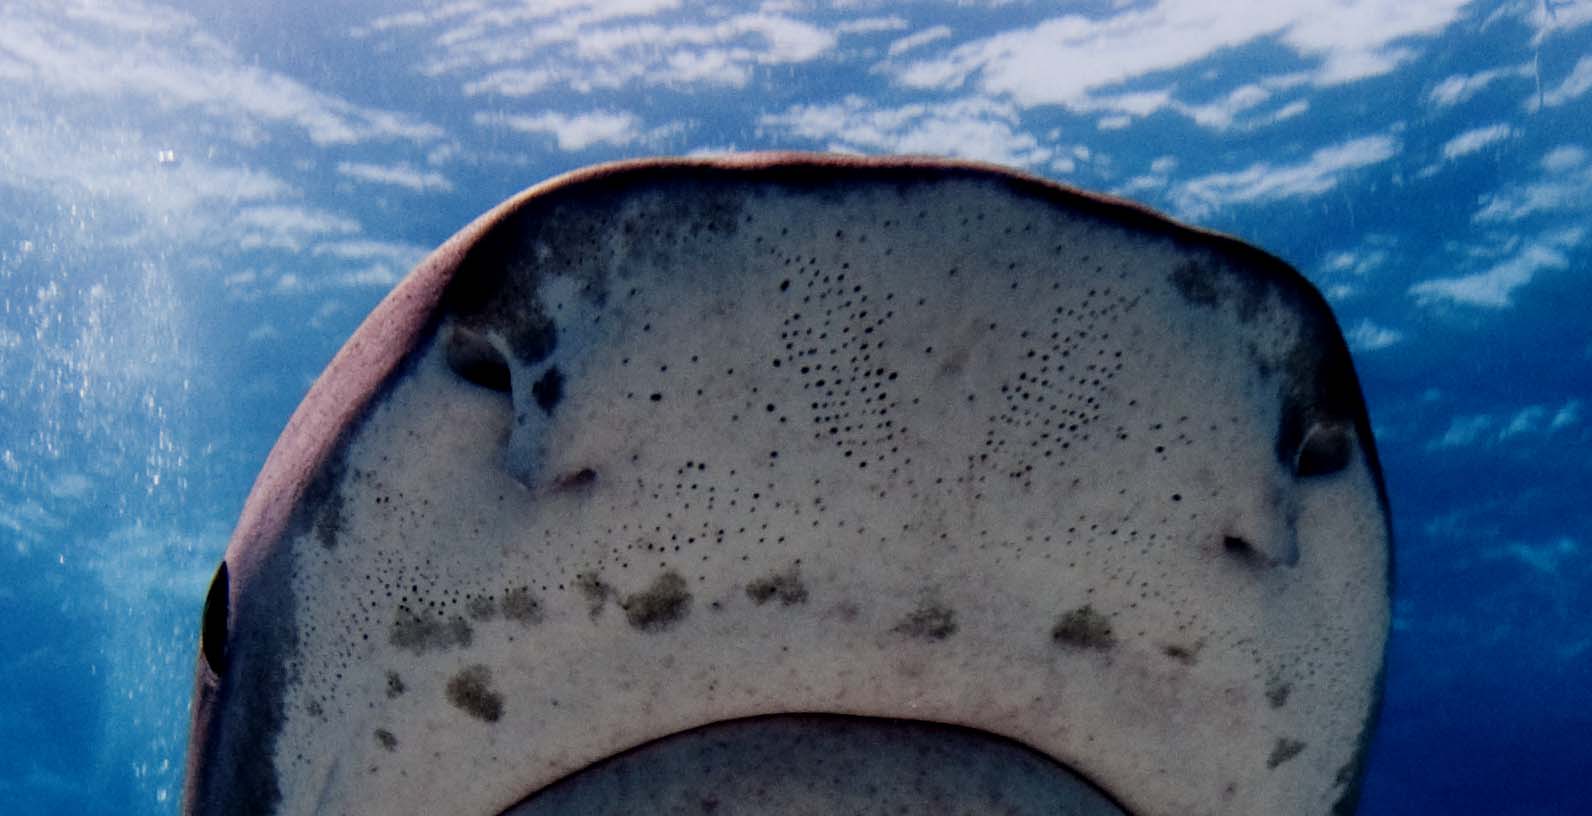 <p><strong>(B)</strong> Ampullae of Lorenzini pores on the snout of a tiger shark</p>